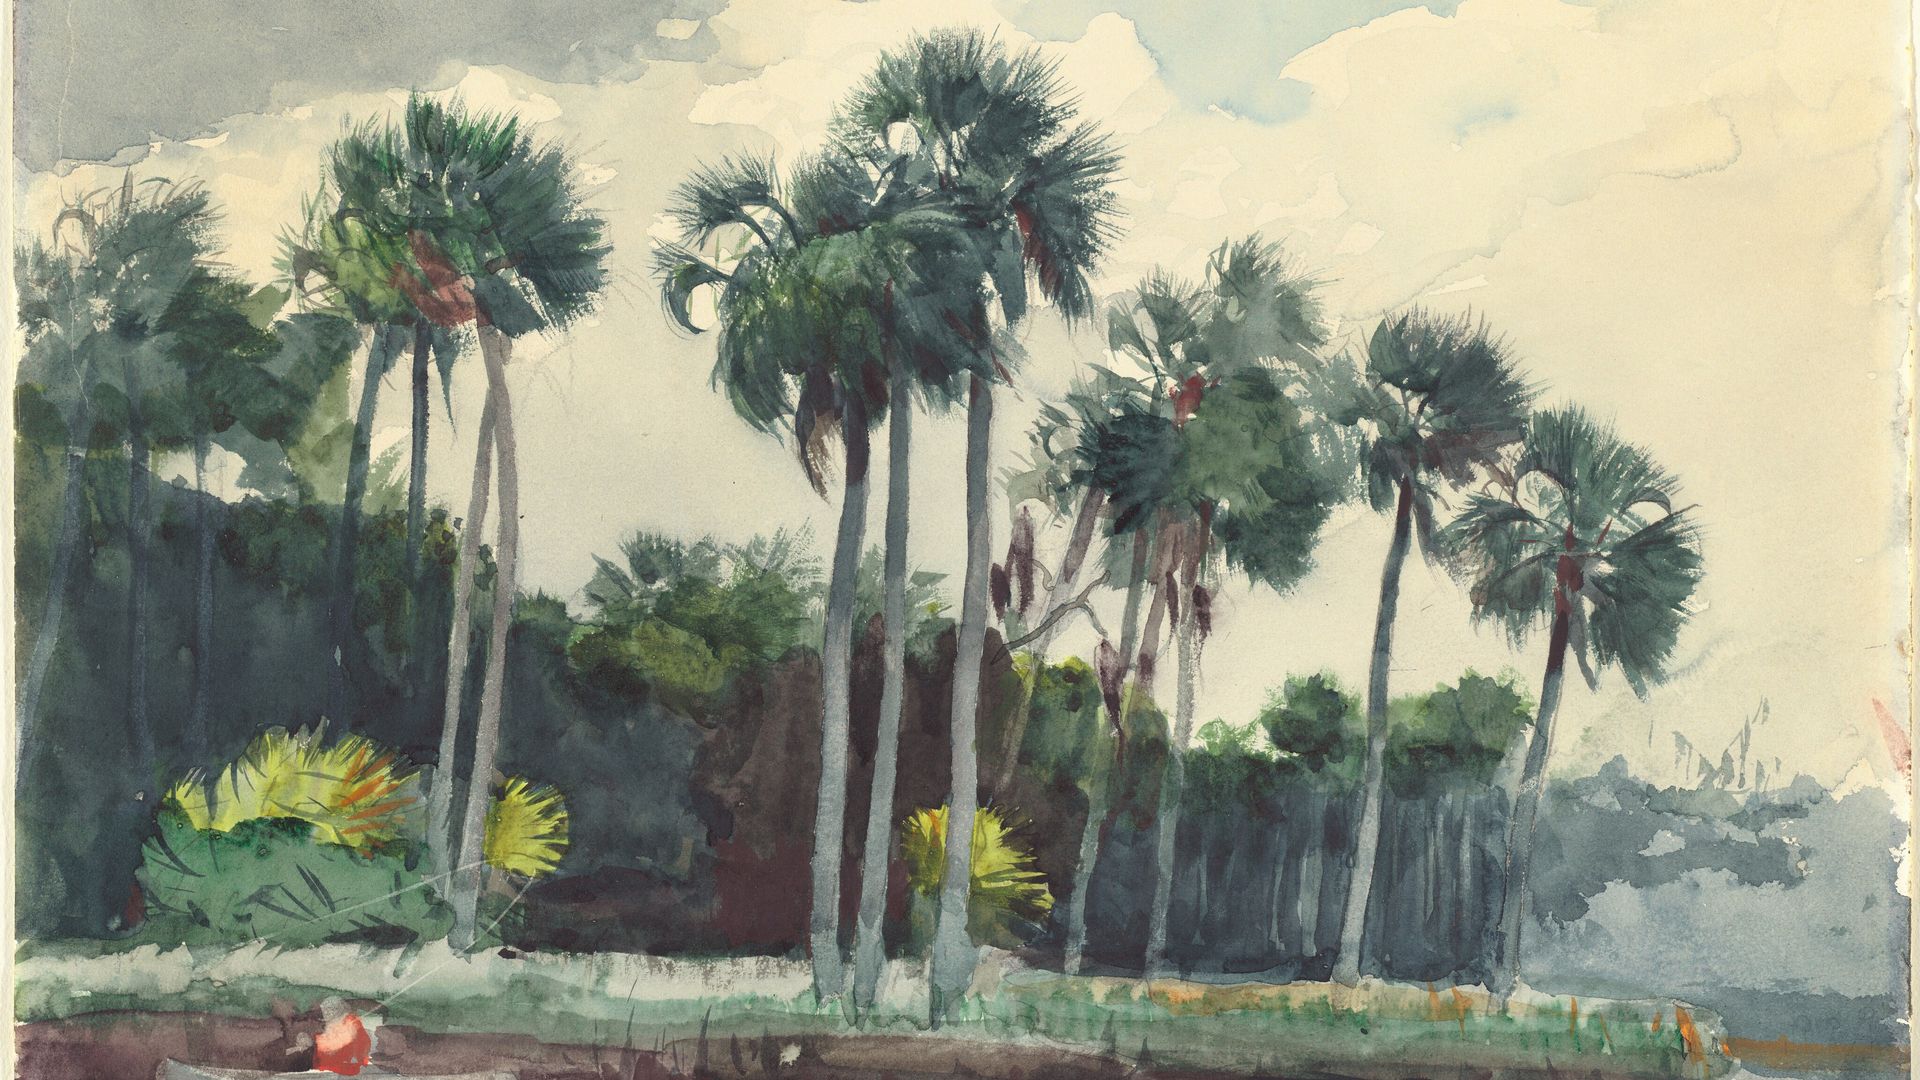 Watercolor painting of someone in a red shirt canoeing by some palm trees 